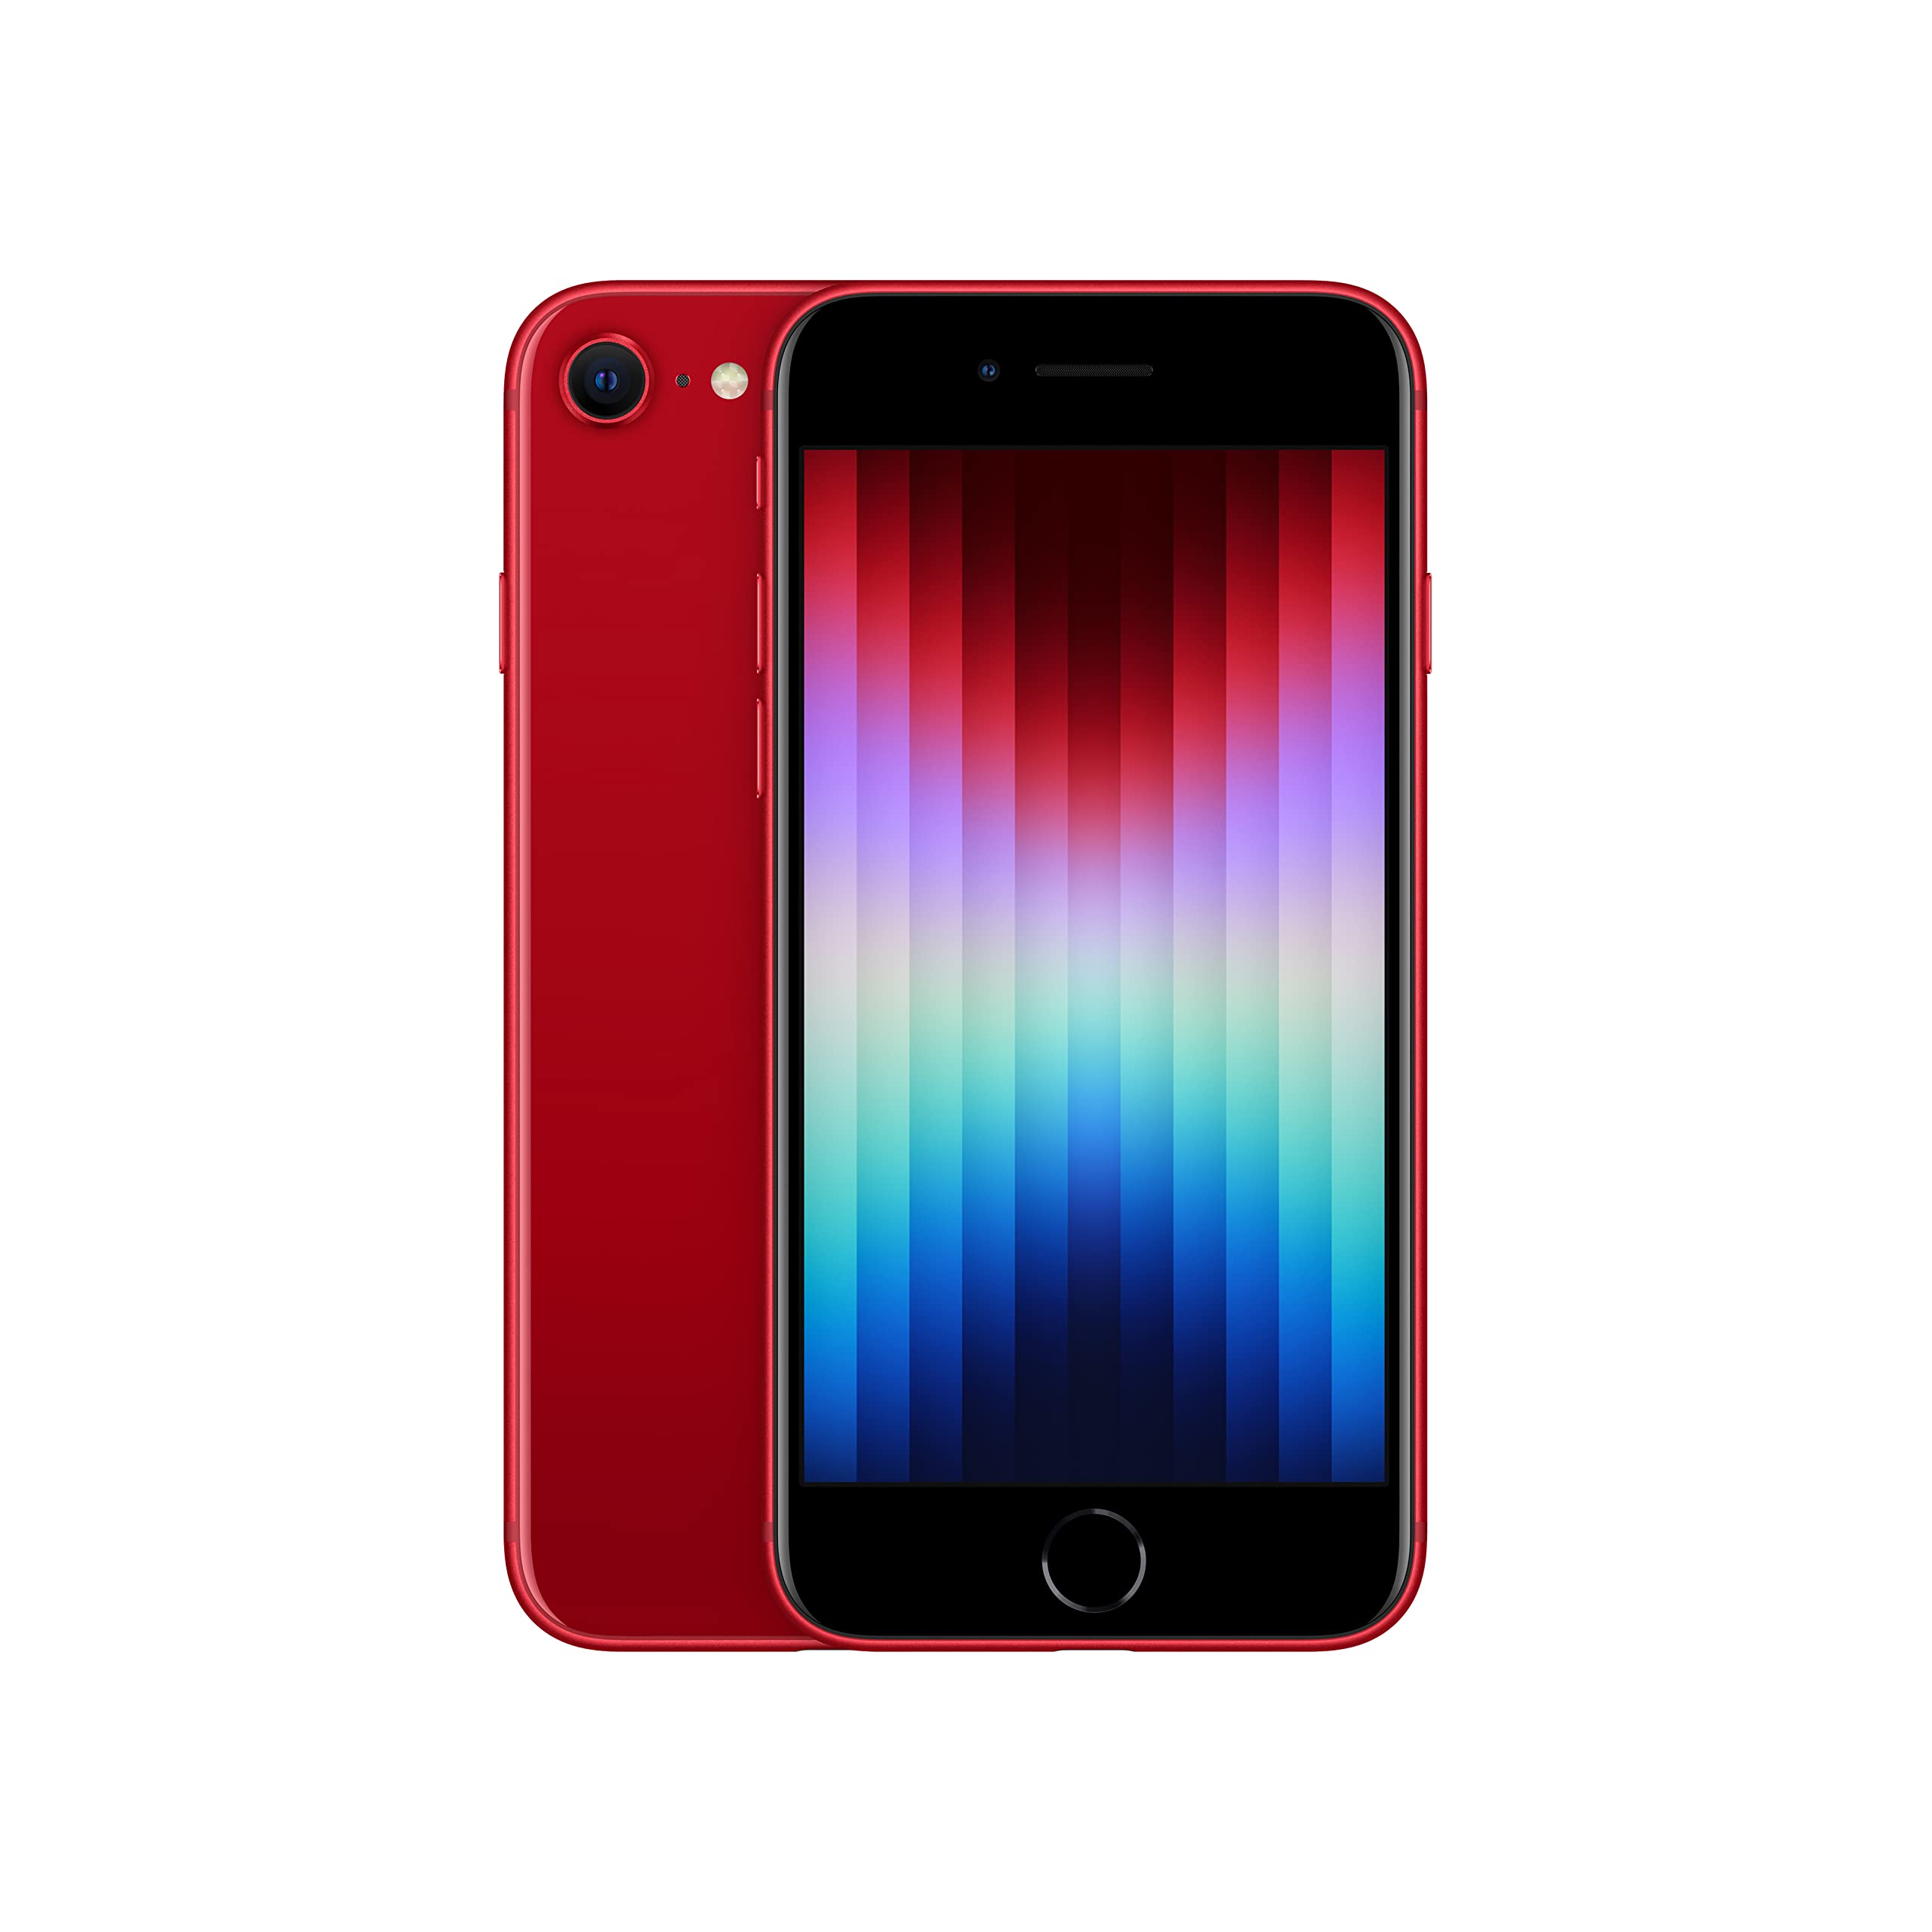 2022 Apple iPhone SE (128 GB) - (PRODUCT) RED